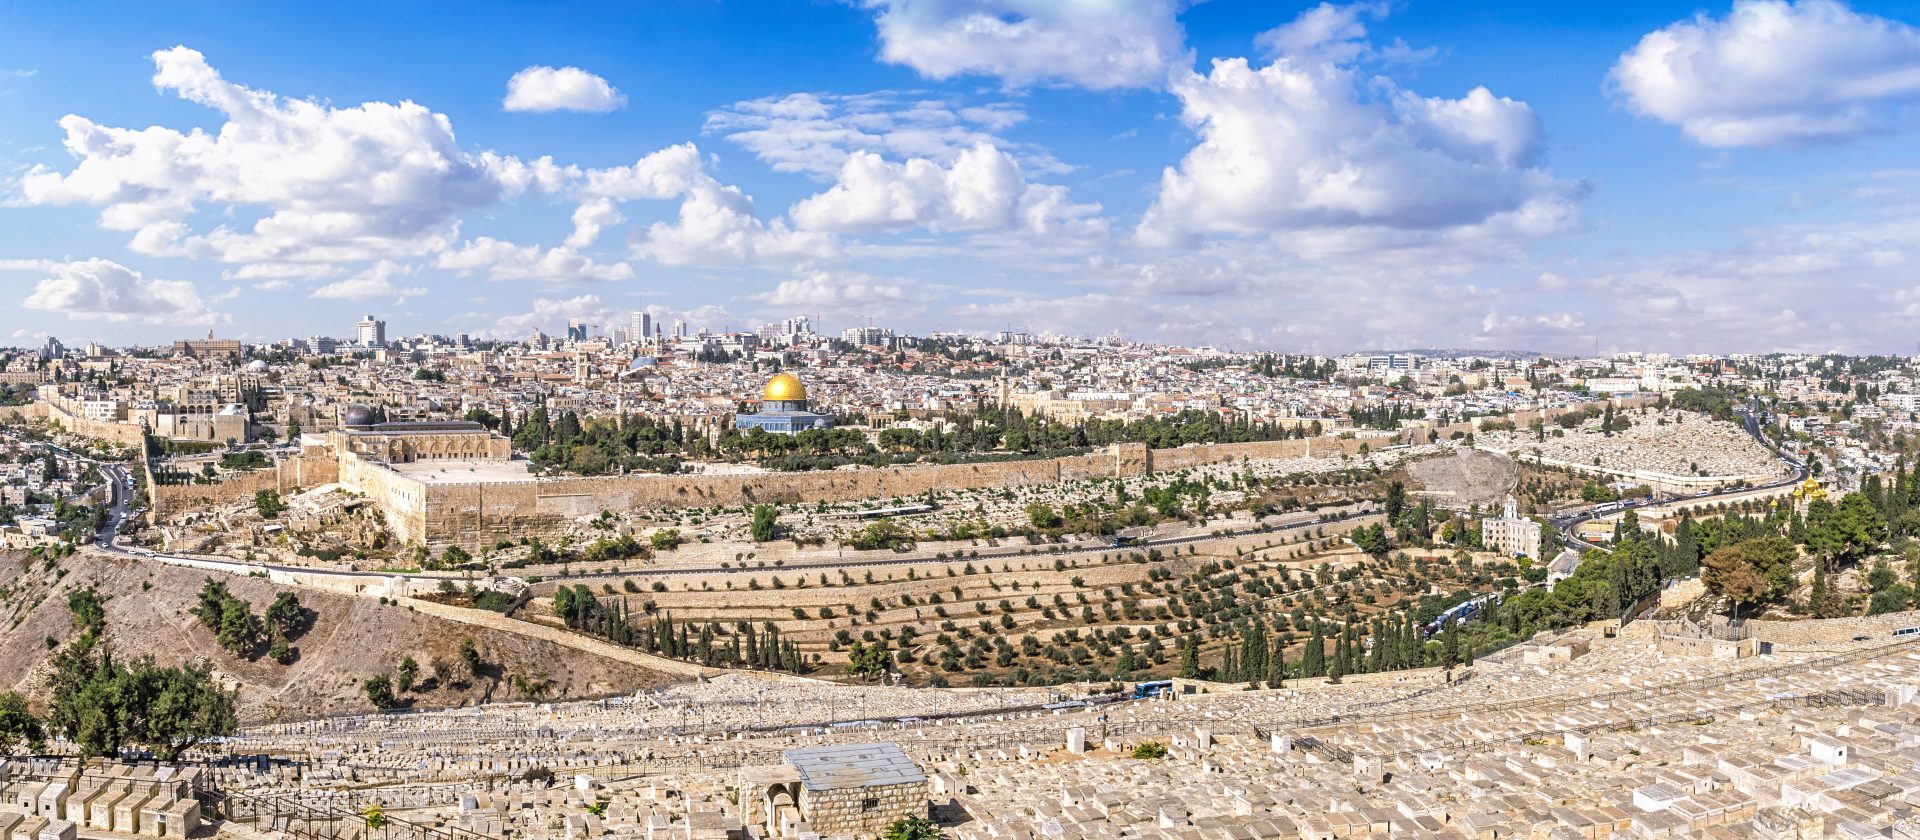 Jerusalem Old City And The Ancient Jewish Cemetery In The